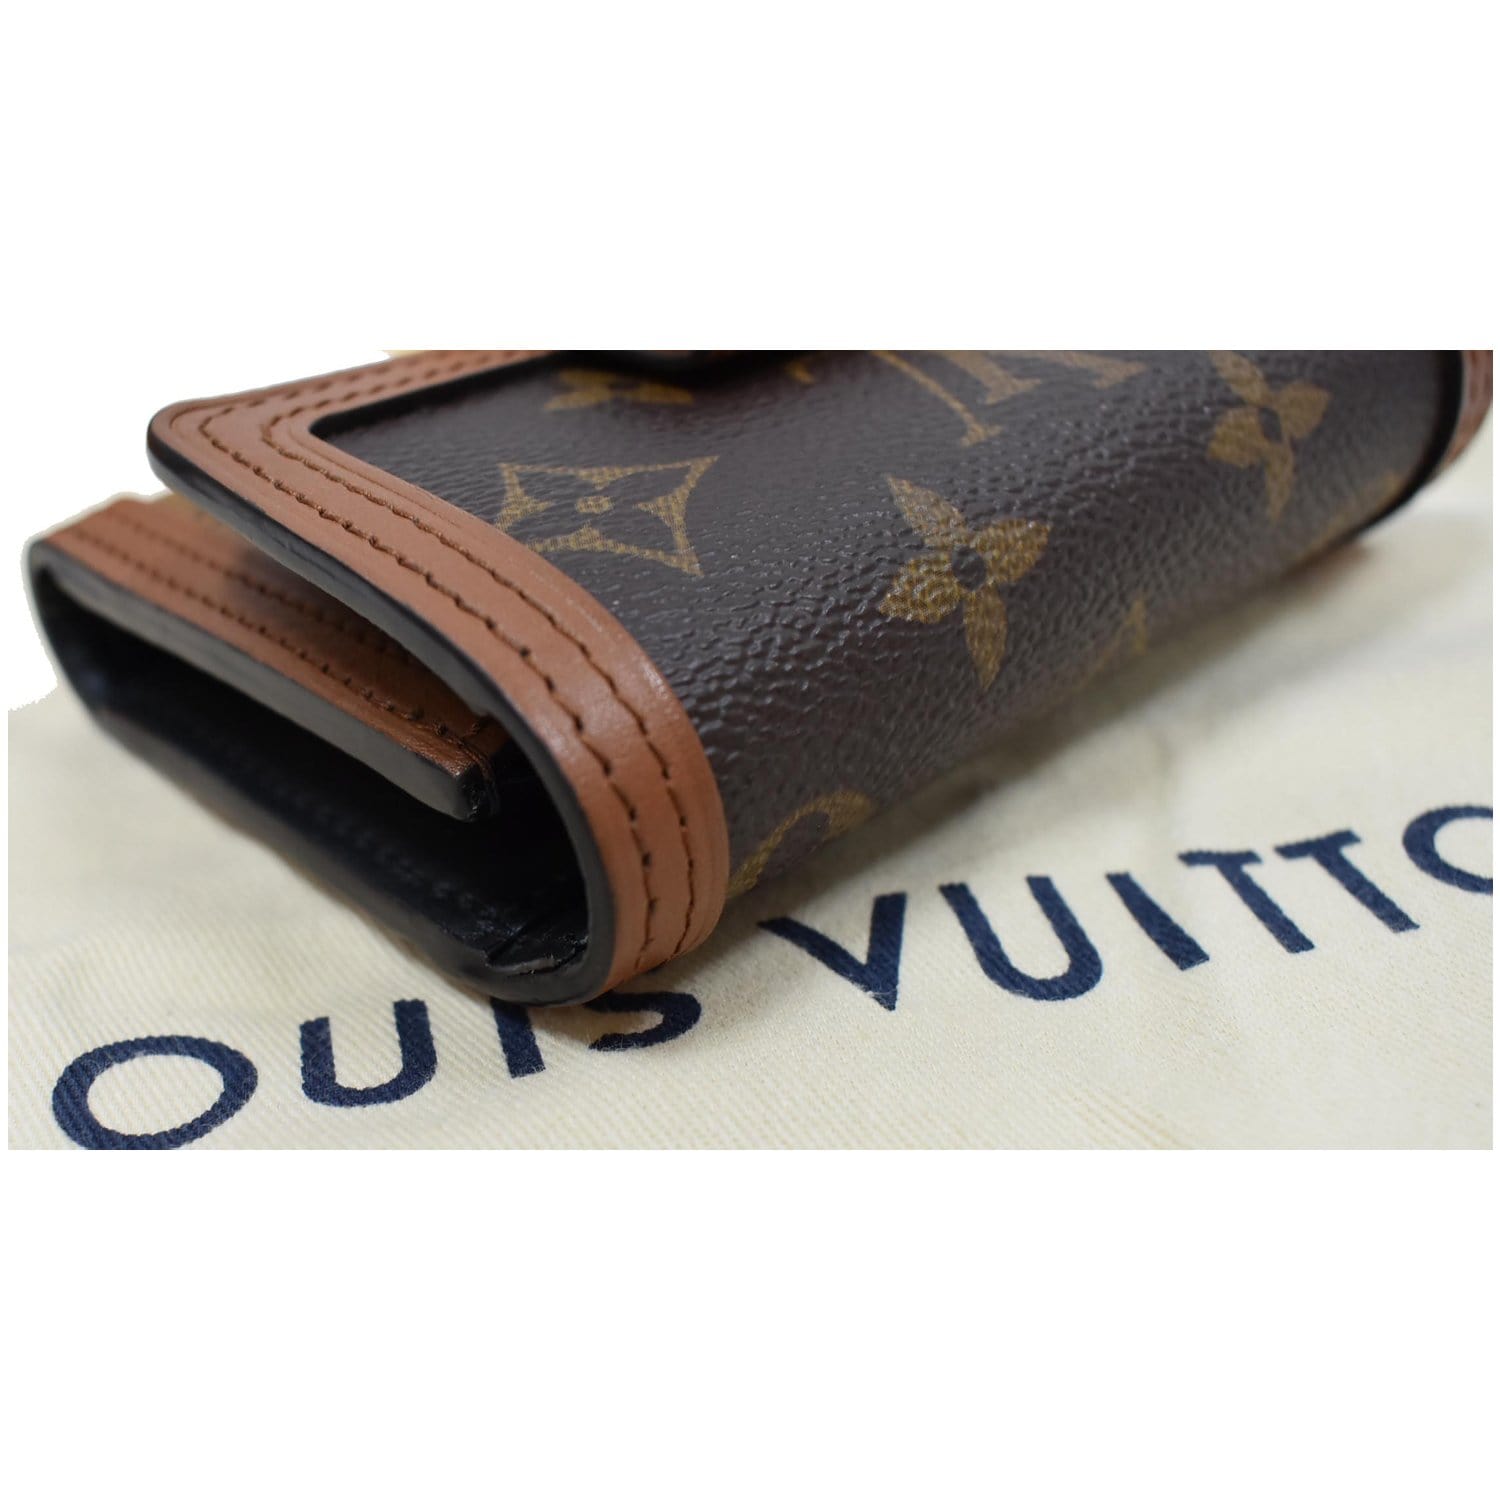 Dauphine Compact Wallet Other Monogram Canvas - Wallets and Small Leather  Goods